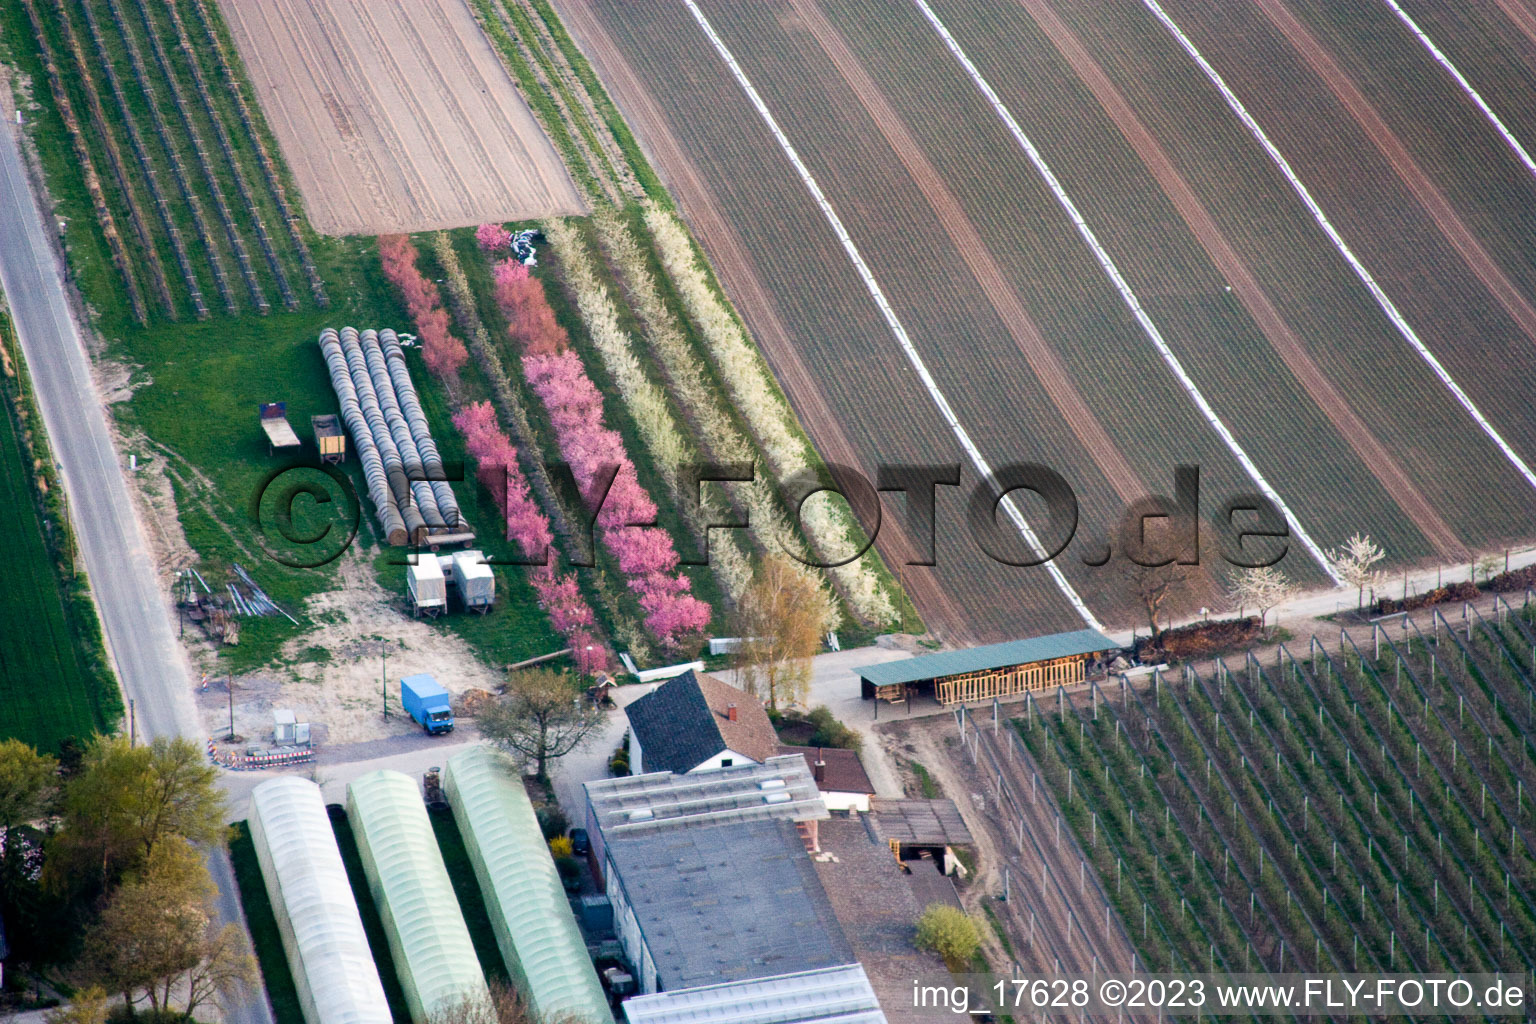 Zapf fruit farm in Kandel in the state Rhineland-Palatinate, Germany from the plane